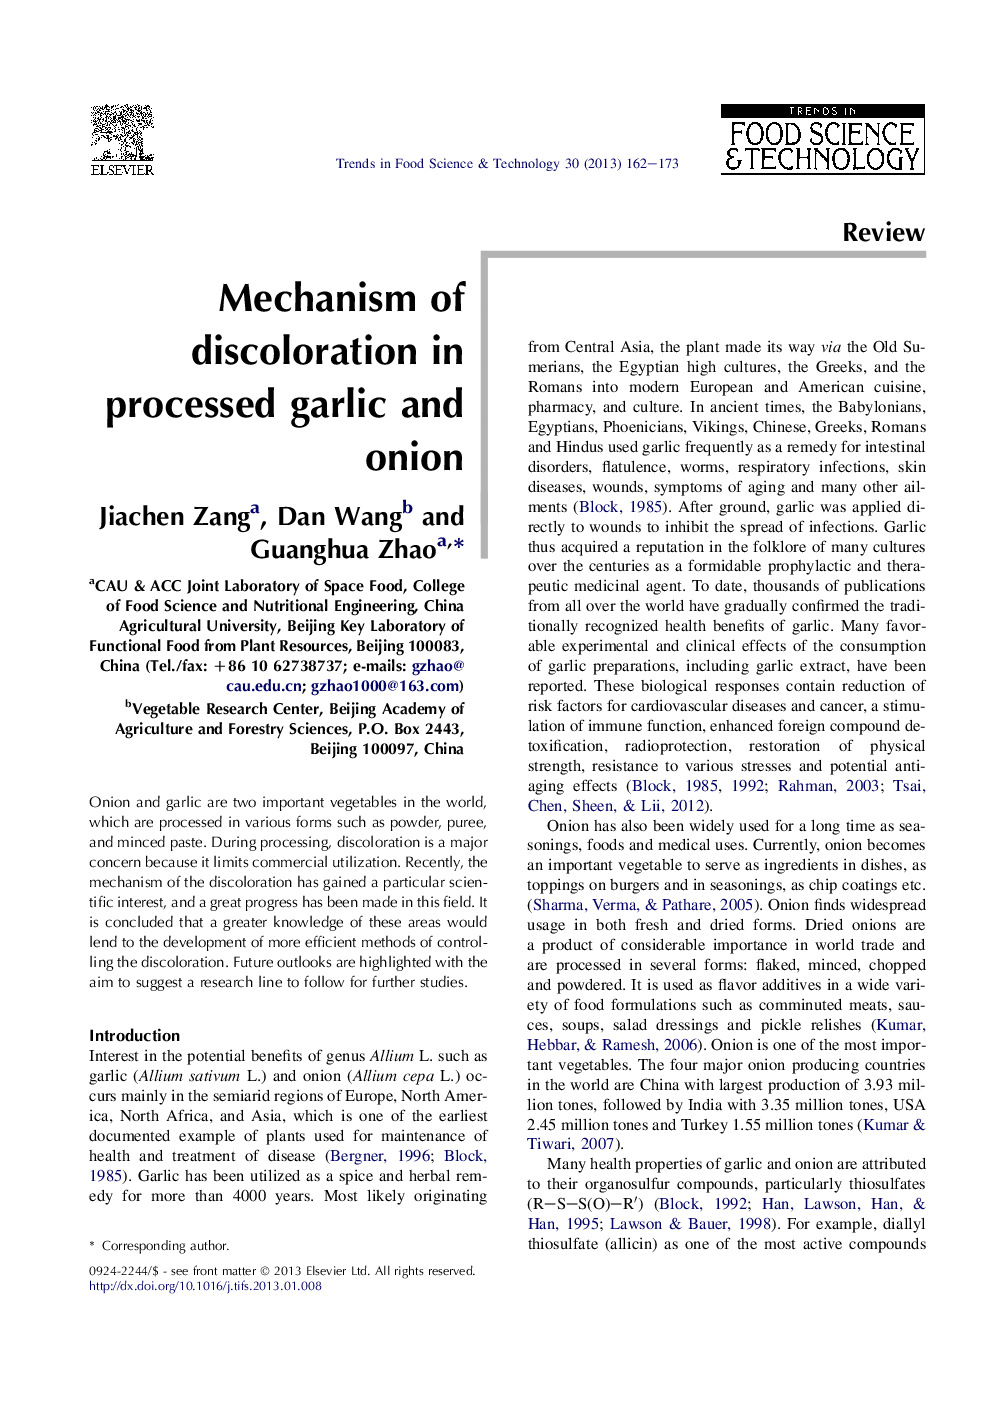 Mechanism of discoloration in processed garlic and onion